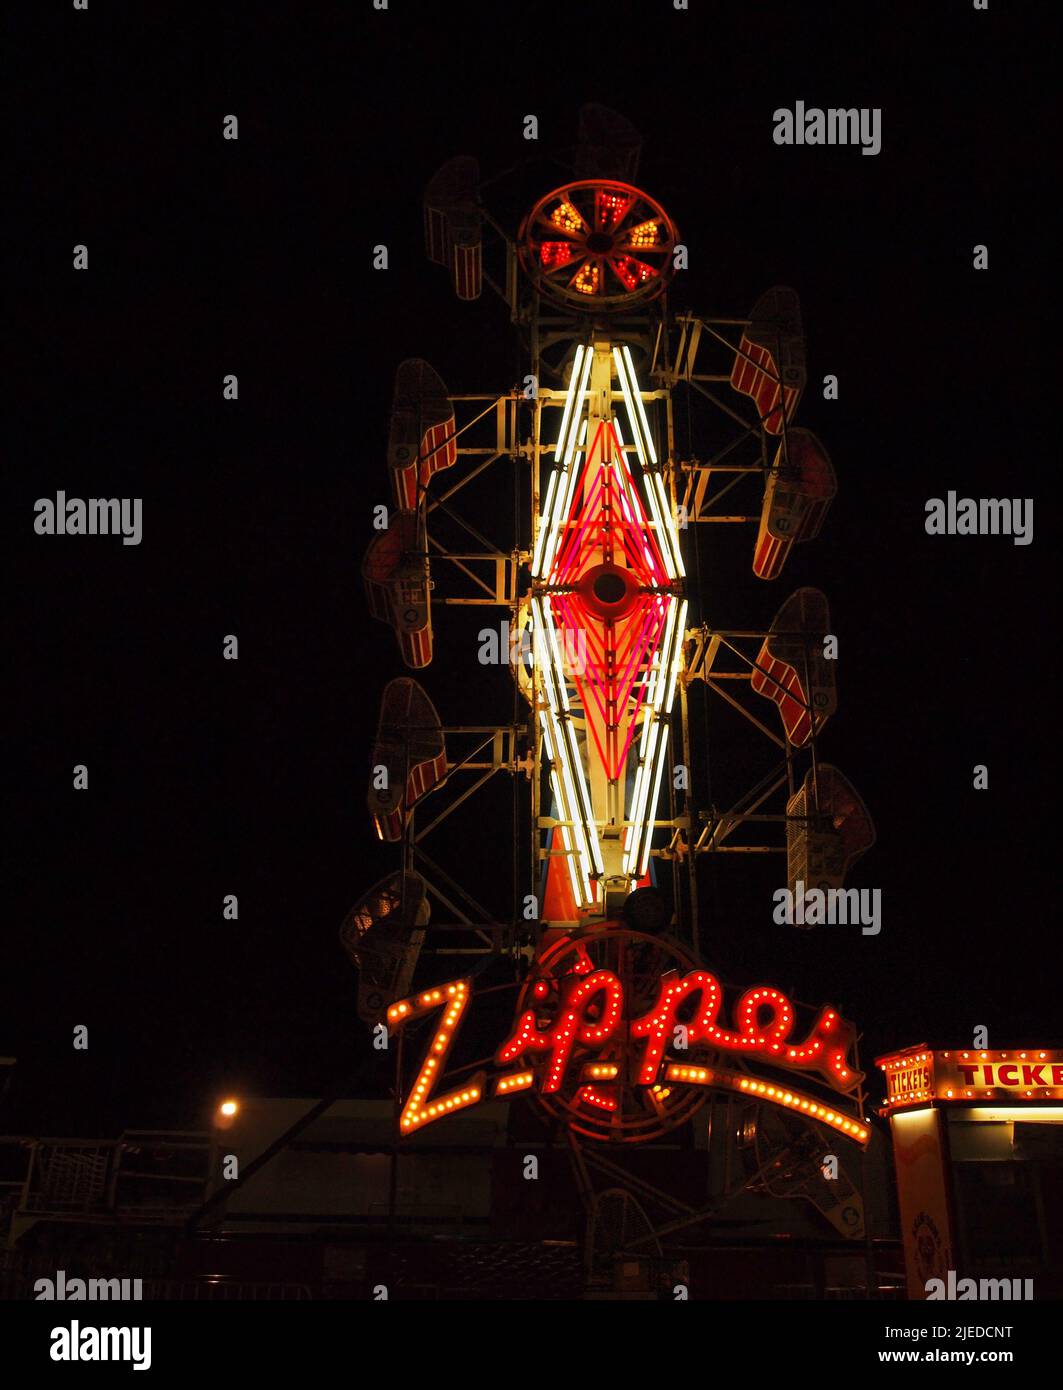 An old fashioned carnival ride and vintage ticket booth illuminated in neon and marquee style lighting at night against a black sky. Stock Photo